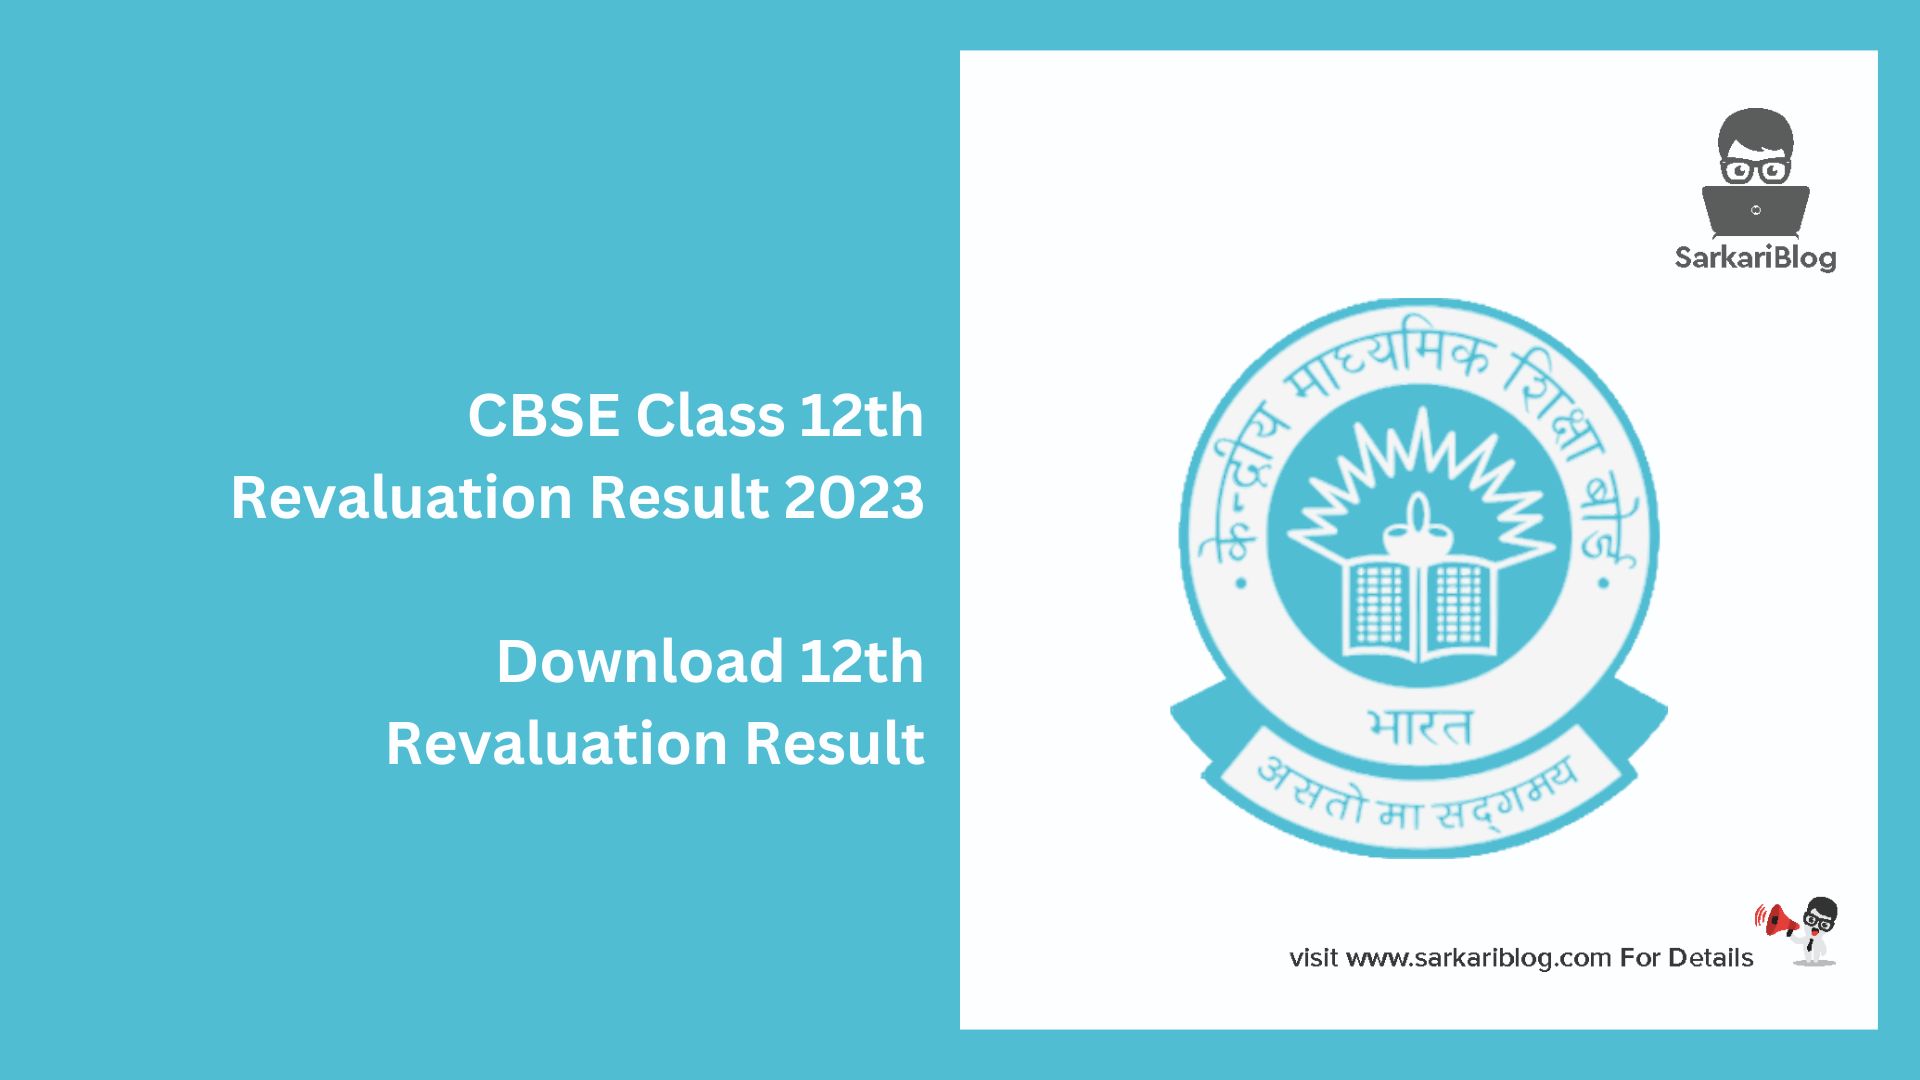 CBSE Class 12th Revaluation Result 2023